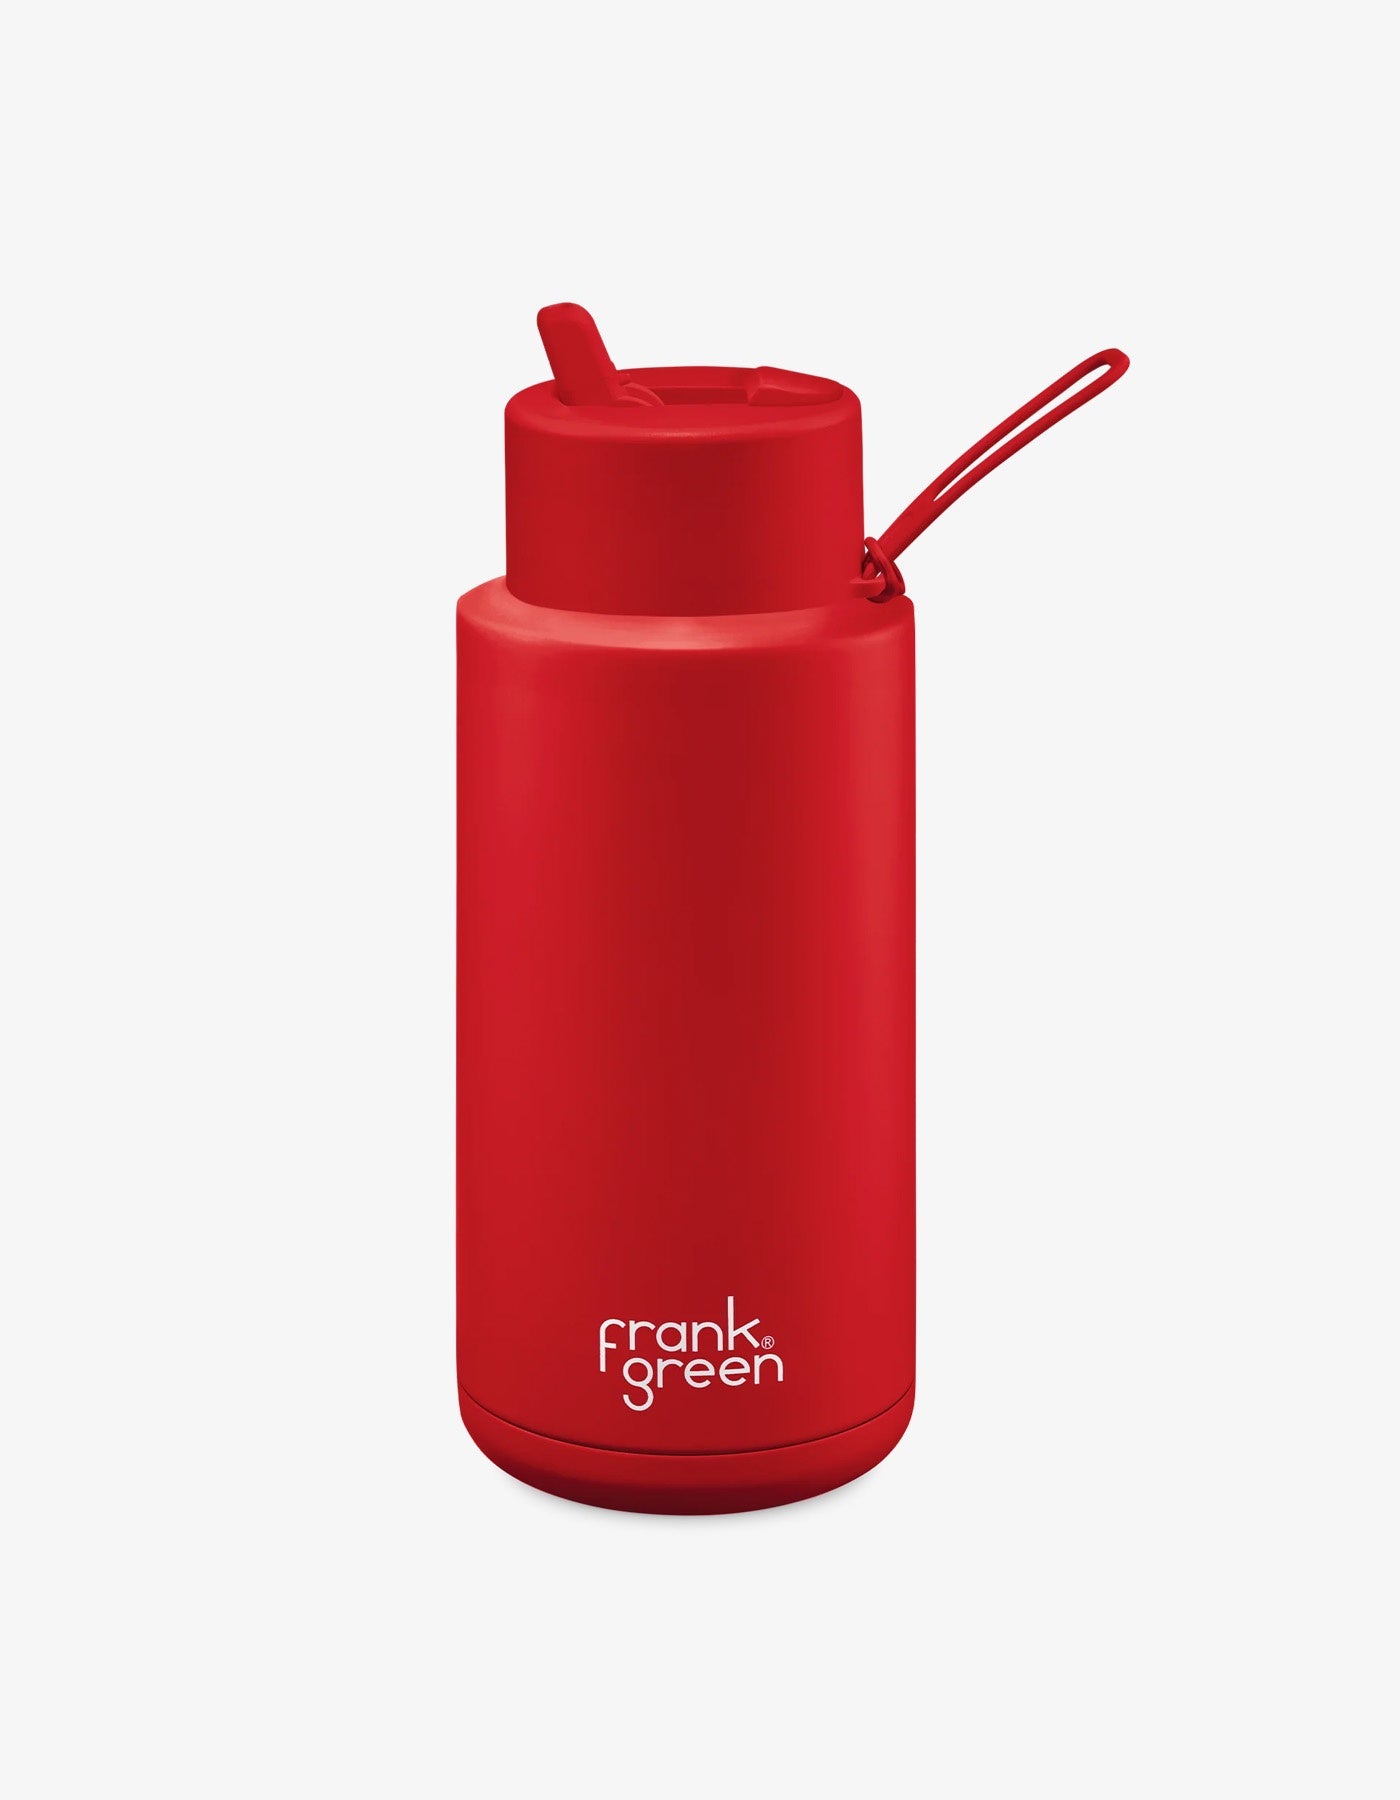 Frank Green 34oz Stainless Steel Ceramic Reusable Bottle Atomic Red with Straw Lid